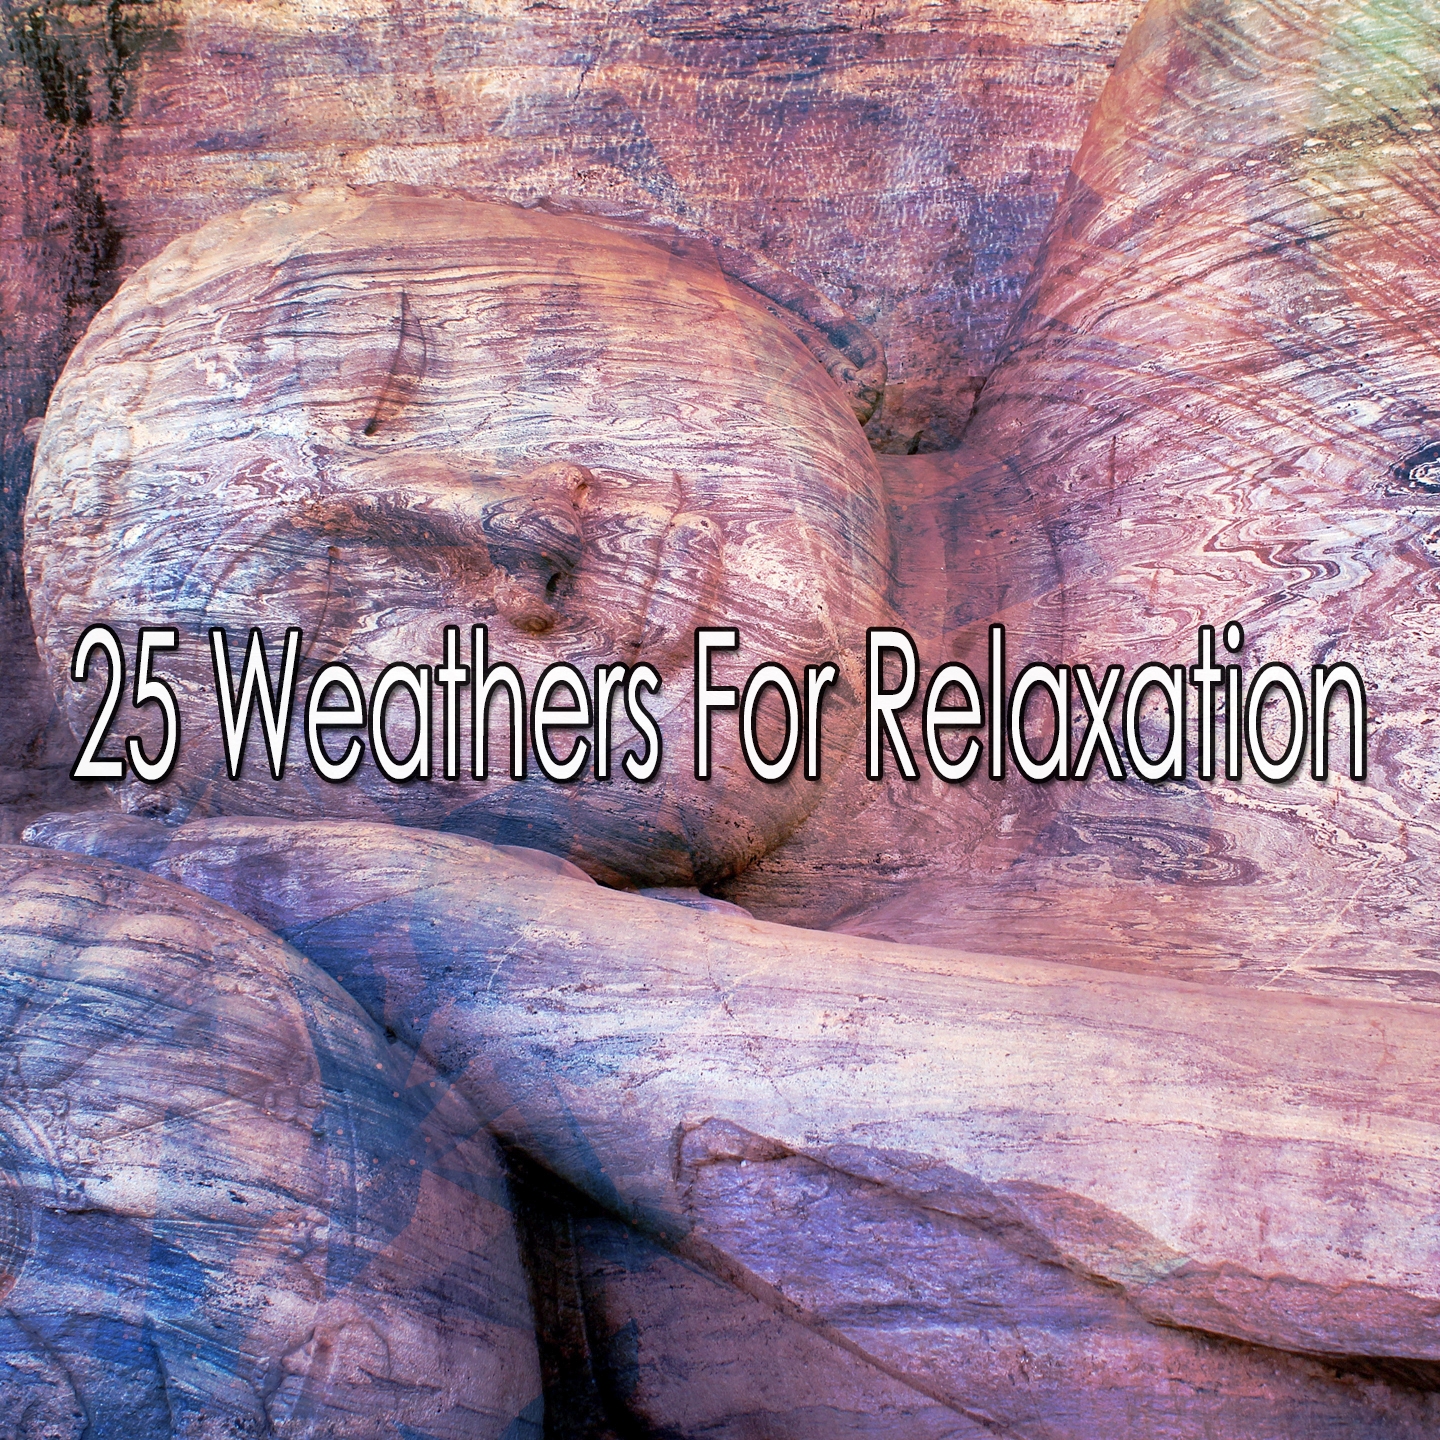 25 Weathers For Relaxation